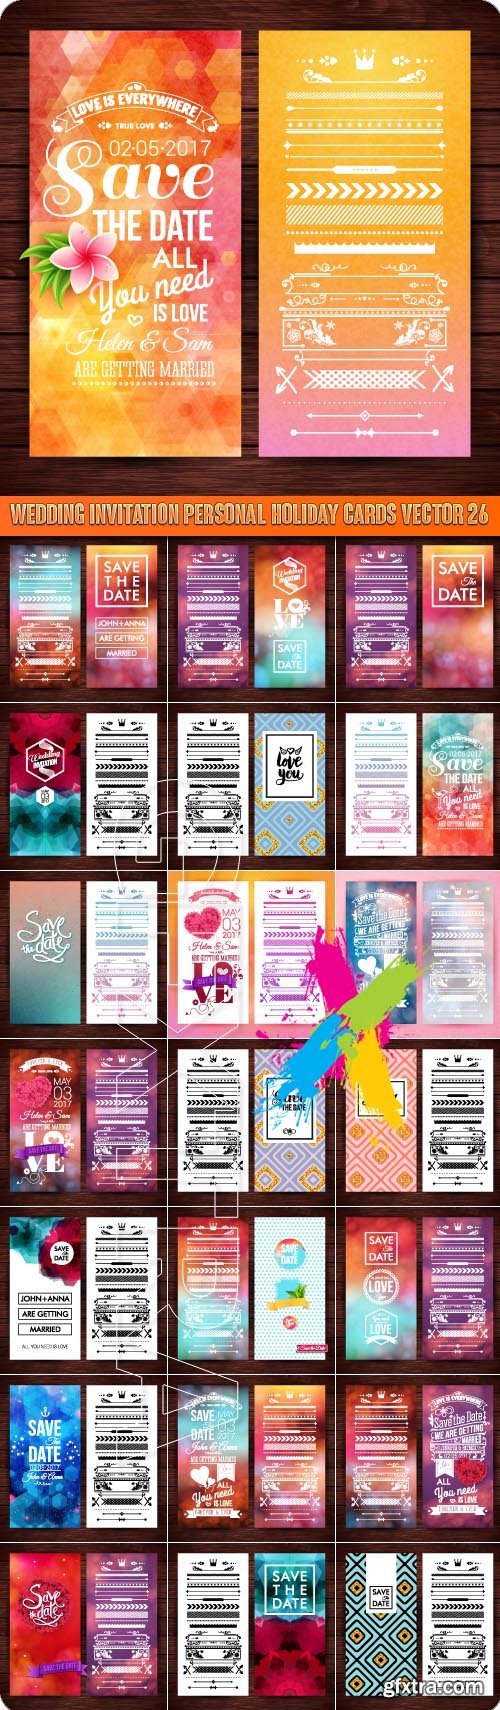 Wedding invitation personal holiday cards vector 26